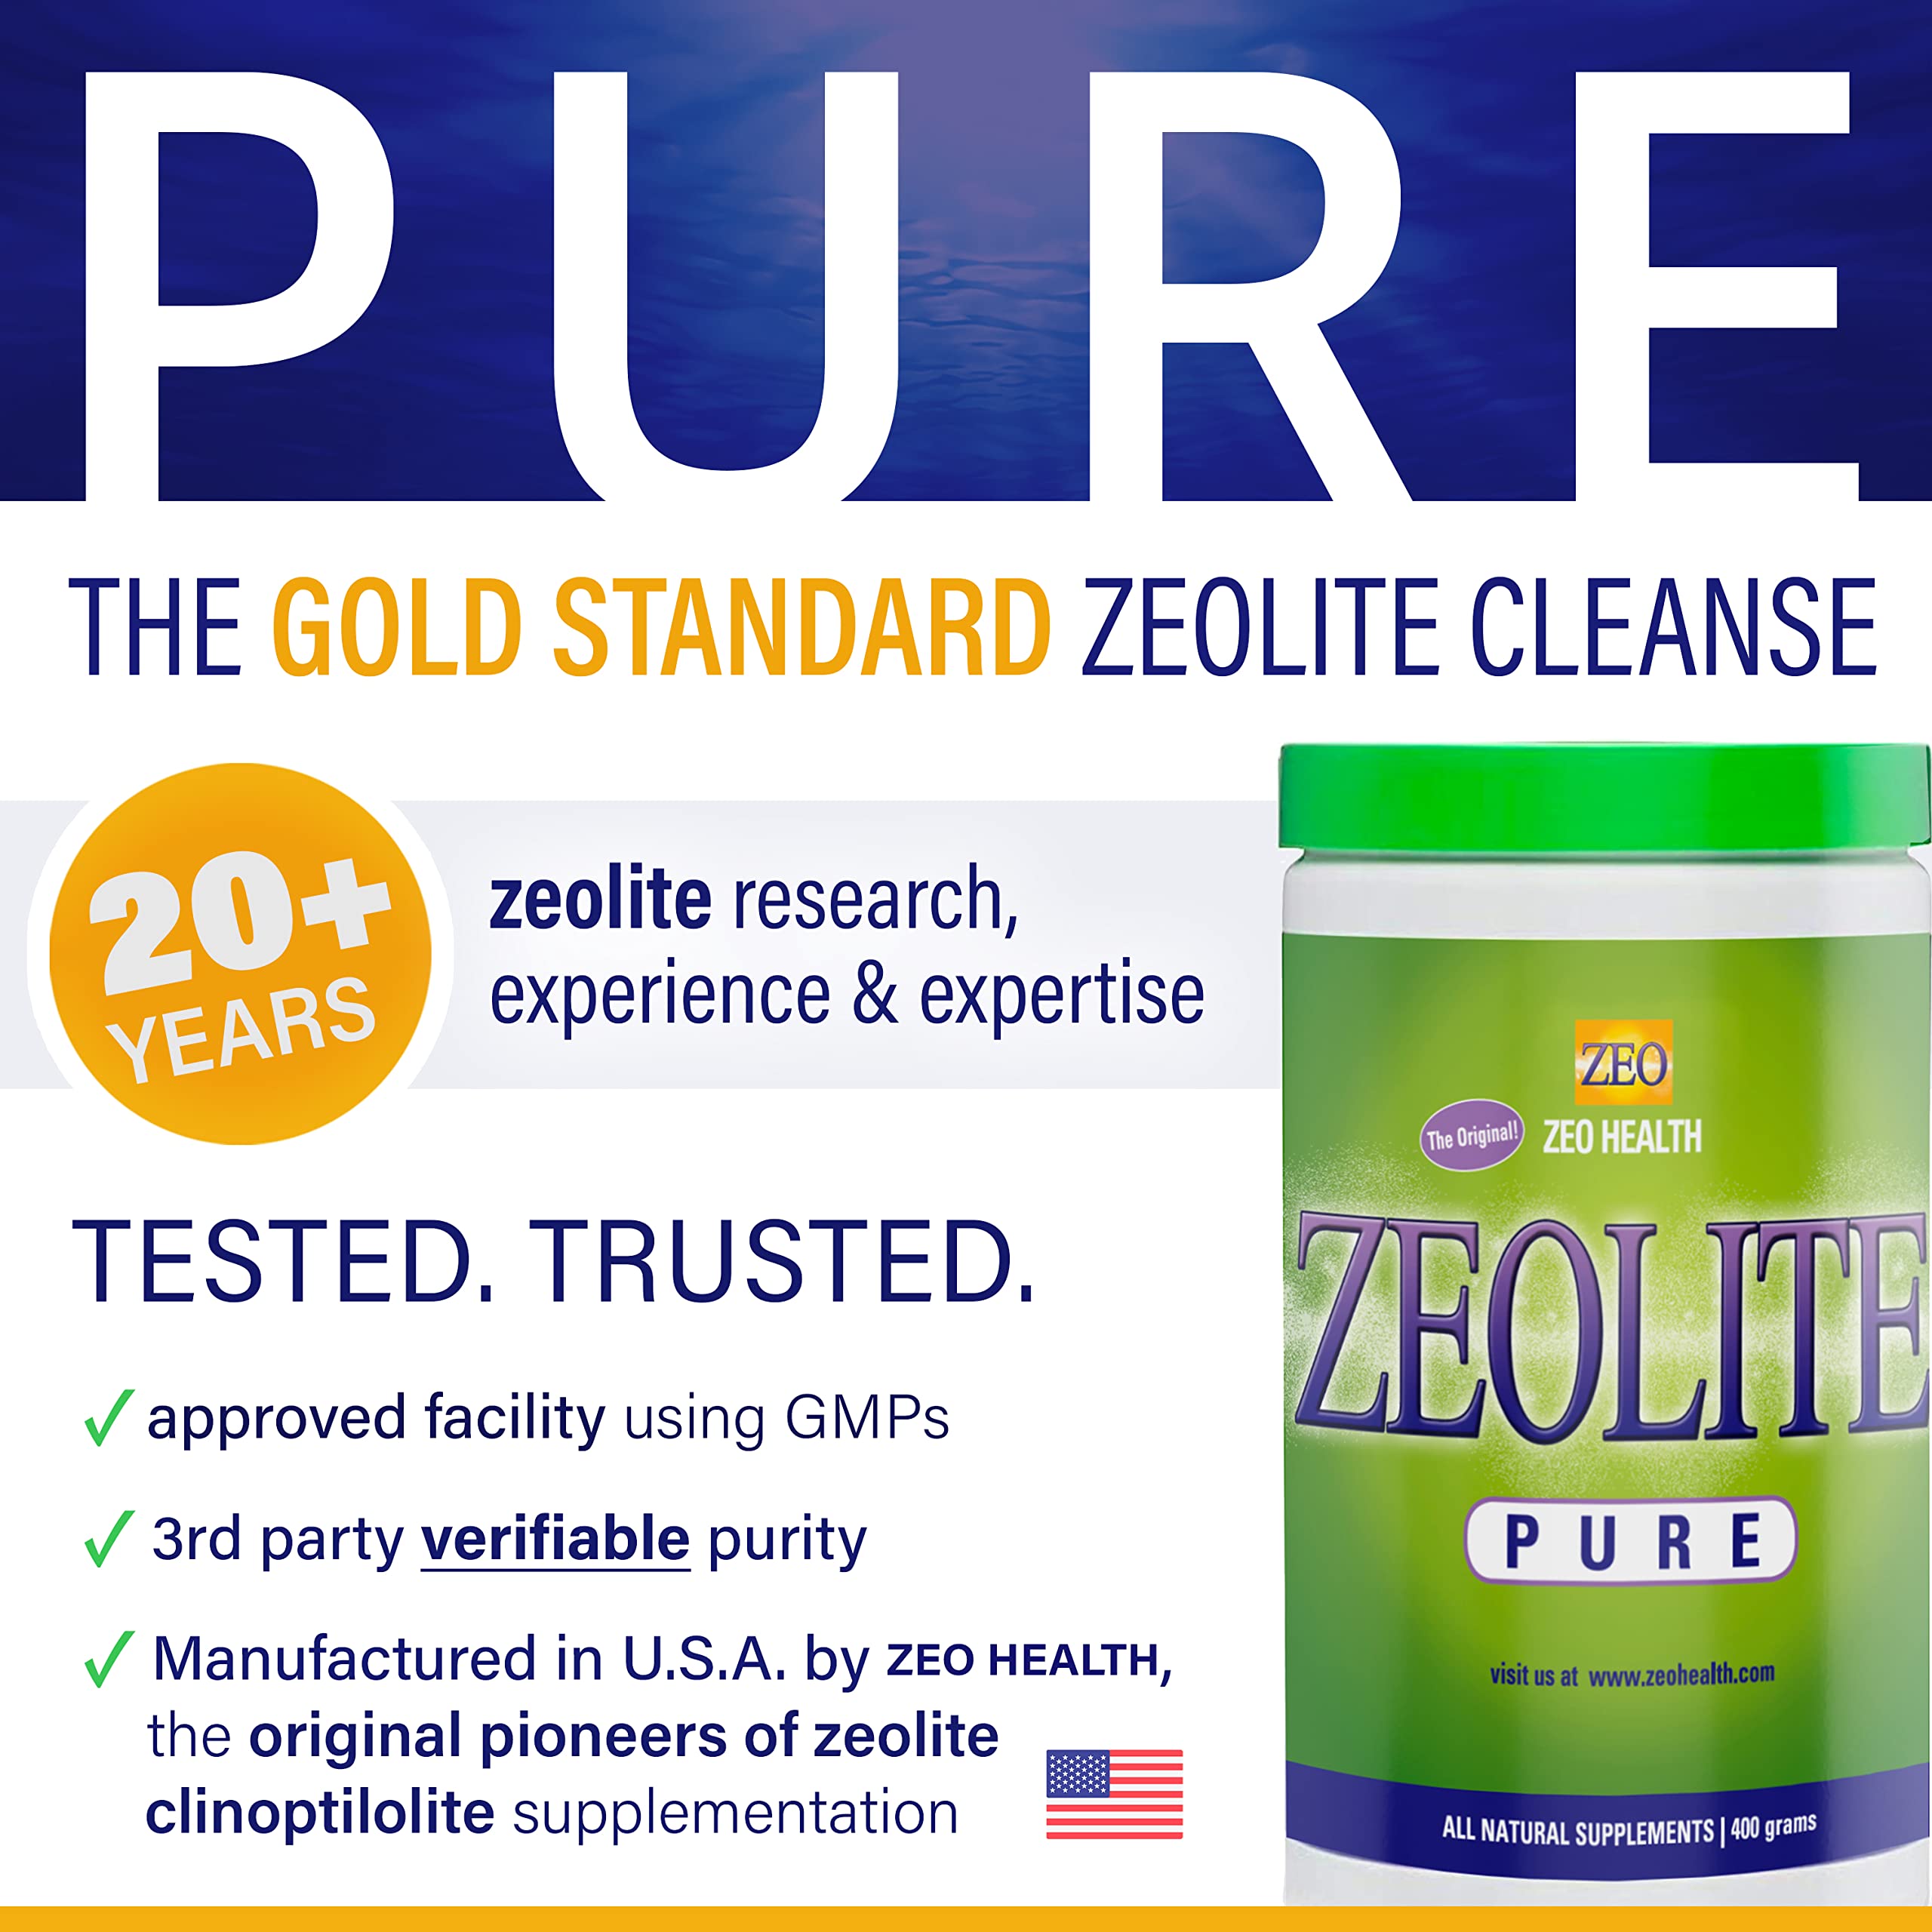 Purchase 100% Natural Zeolite Pure Heavy Metal Detox At The Absolute Lowest Prices